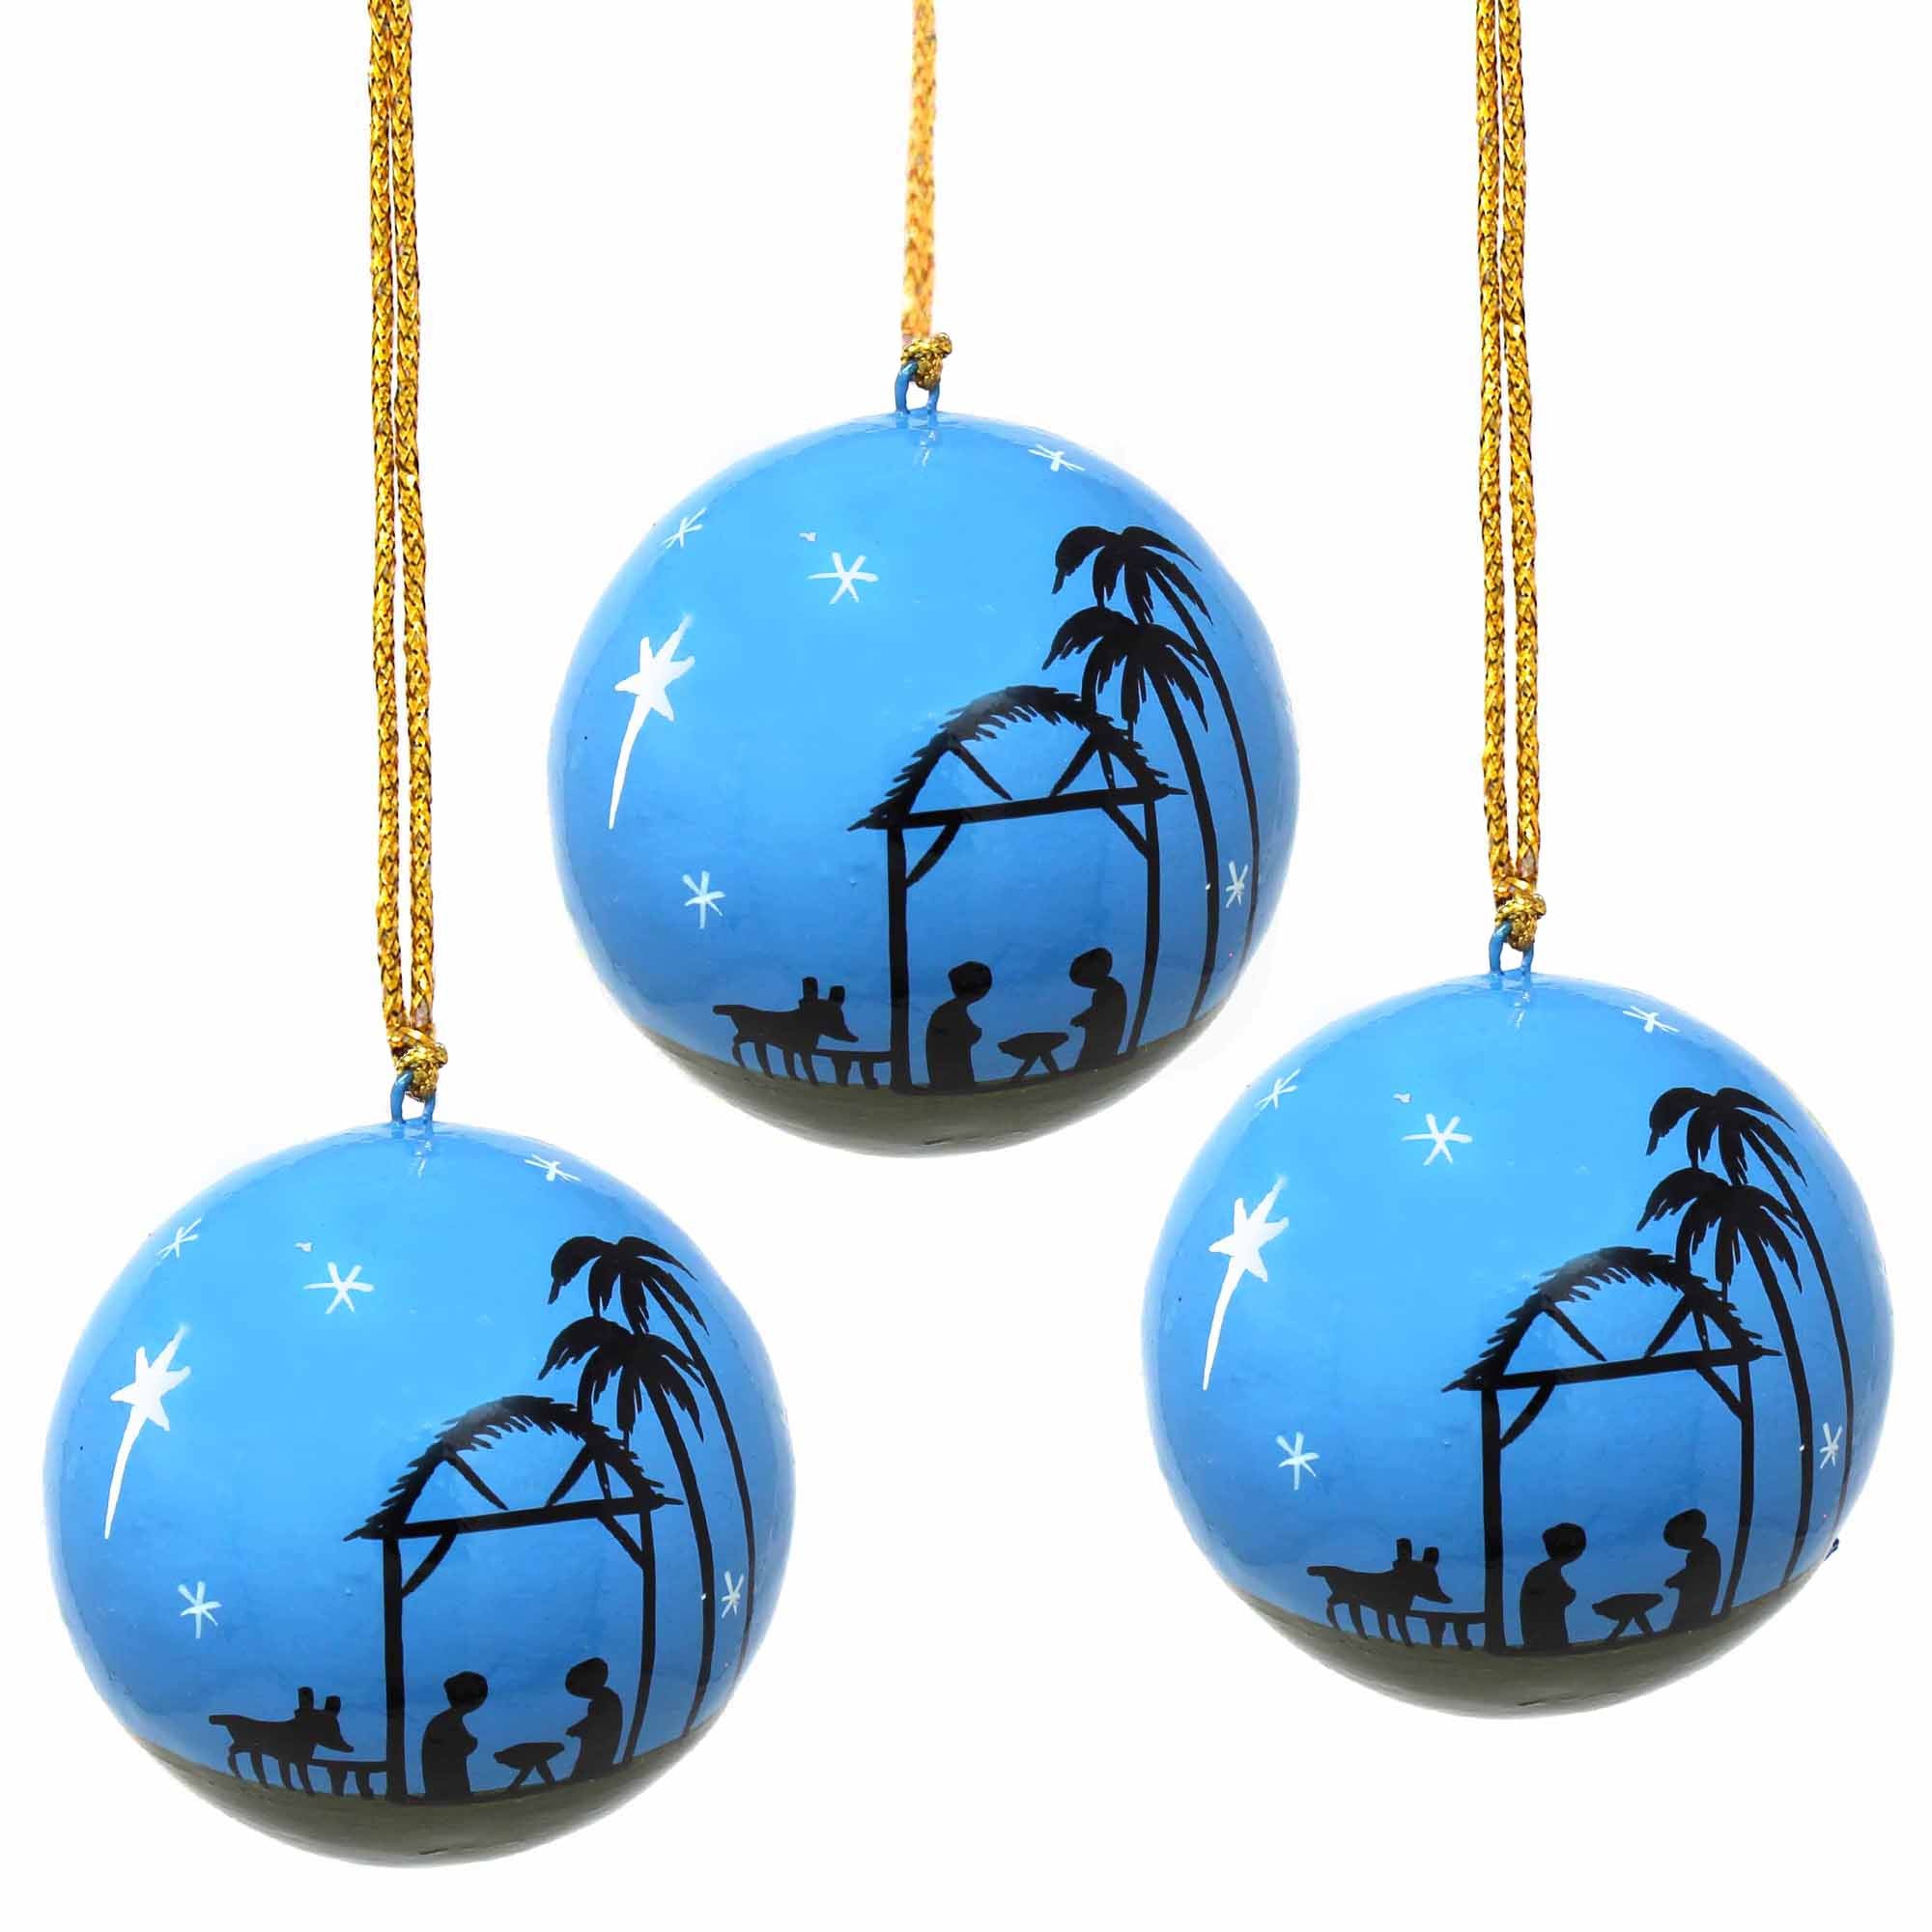 Handpainted Christmas Nativity Ornaments - Pack of 3